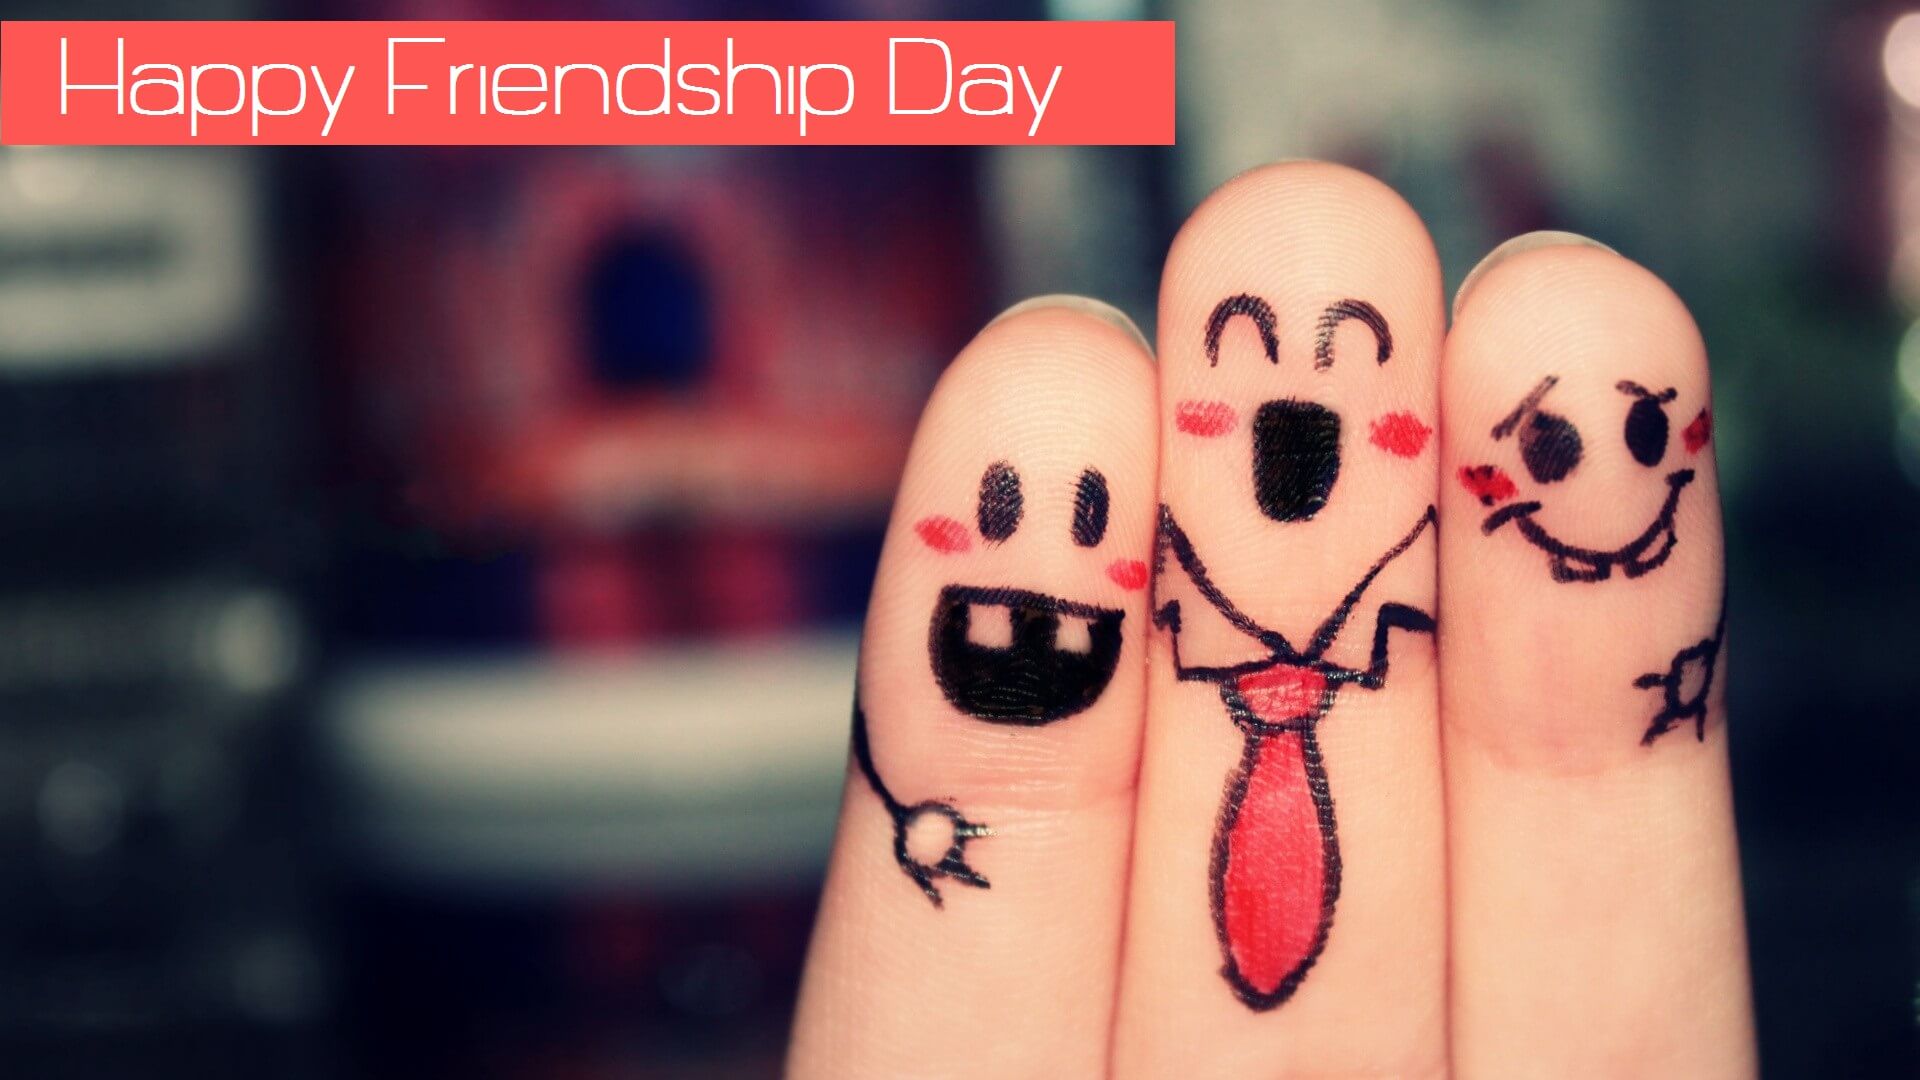 happy friendship day 2018 HD wallpaper images